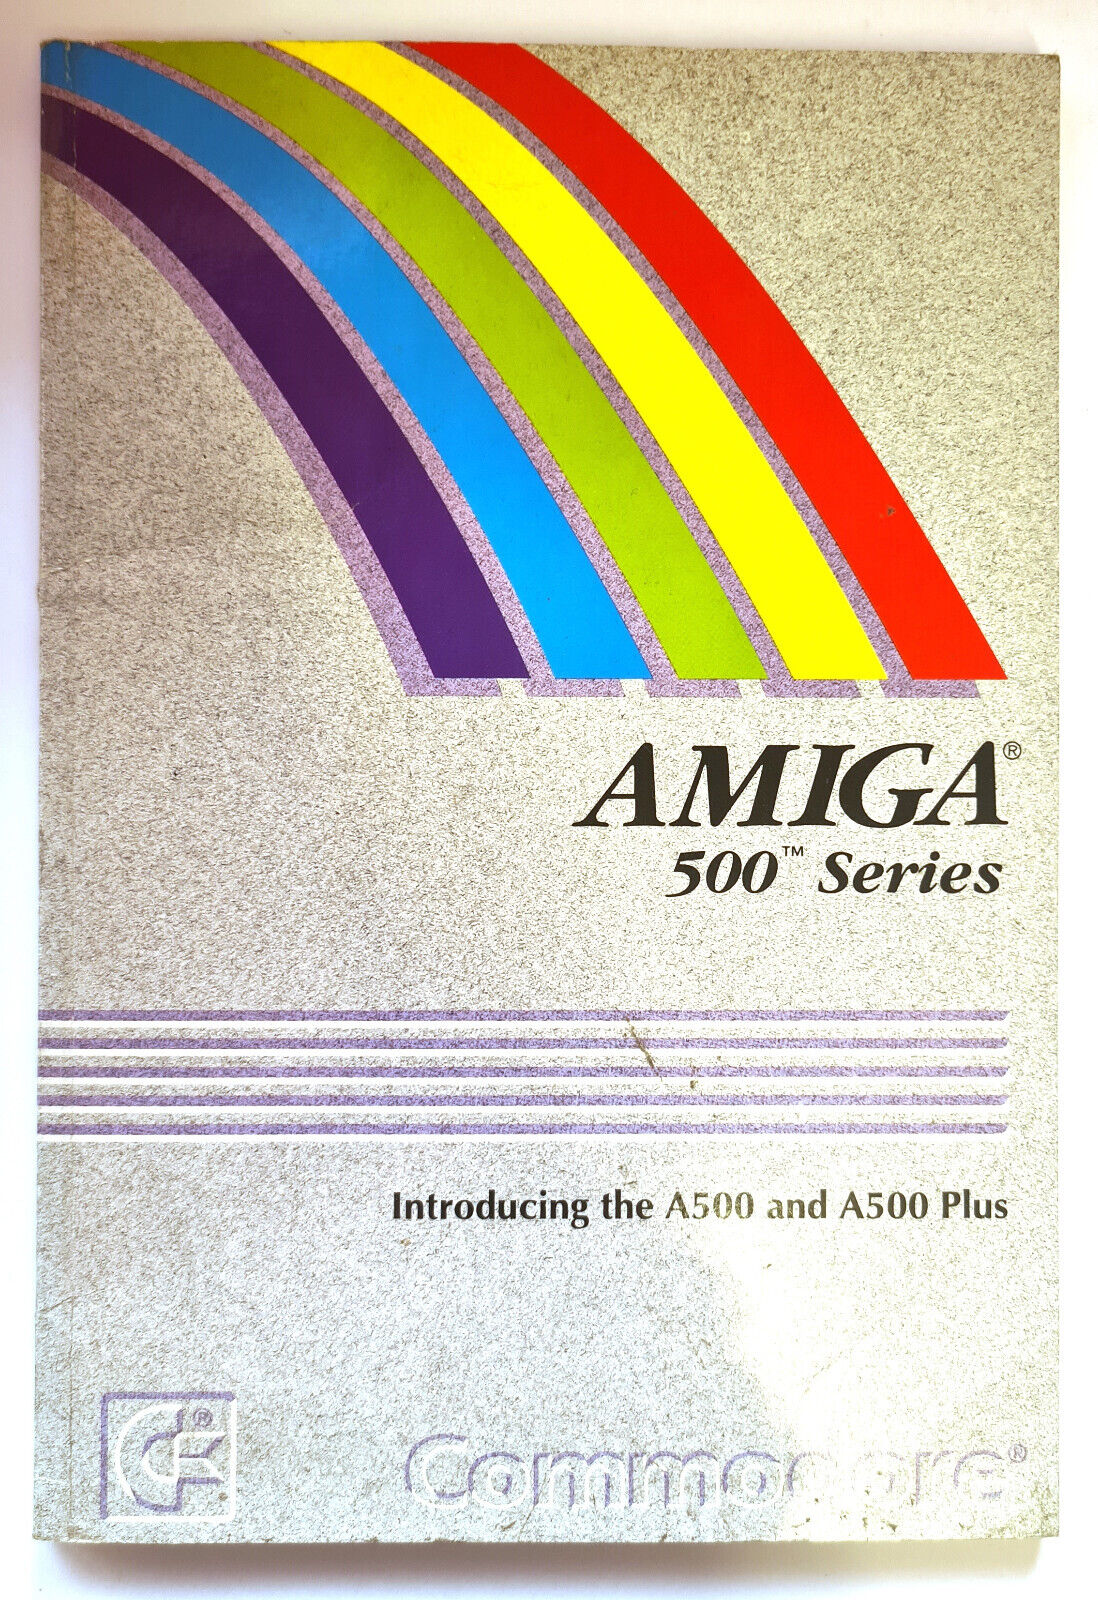 Introducing Le Amiga 500 Series User Guide Manual for A500 Computer